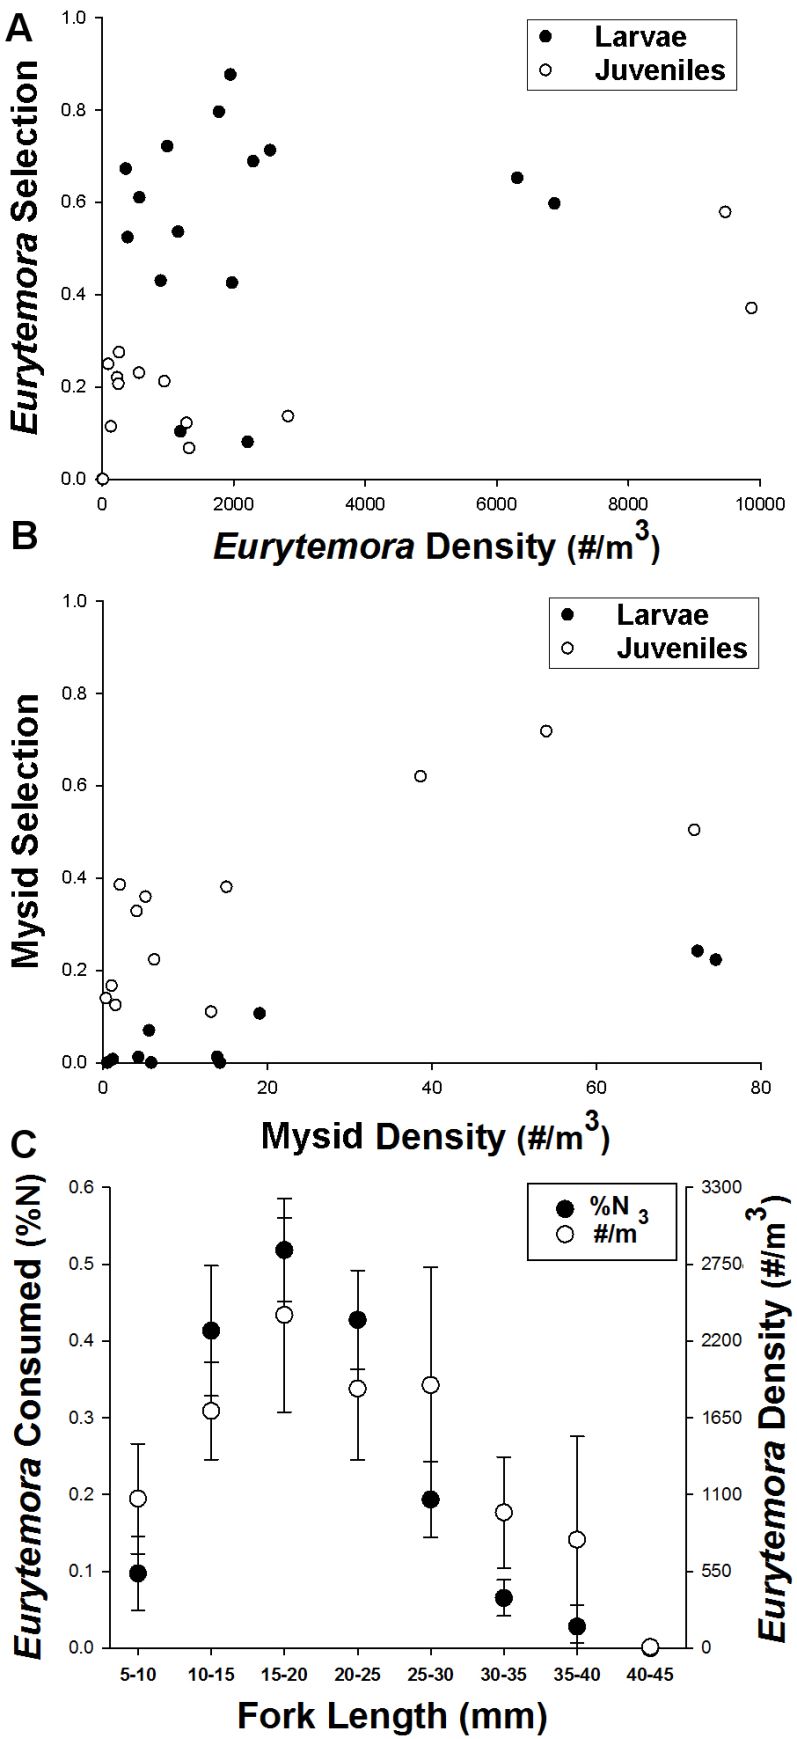 Mean selection indices of larval (black dots) and juvenile (white circles) Longfin Smelt from each region as a function of zooplankton abundance (#/m3) for Eurytemora (A) and Mysids (B). Mean Eurytemora in the diets (%N, black dots) and the environment (#/m3, white dots) by fork length is given in (C). Error bars are standard error.